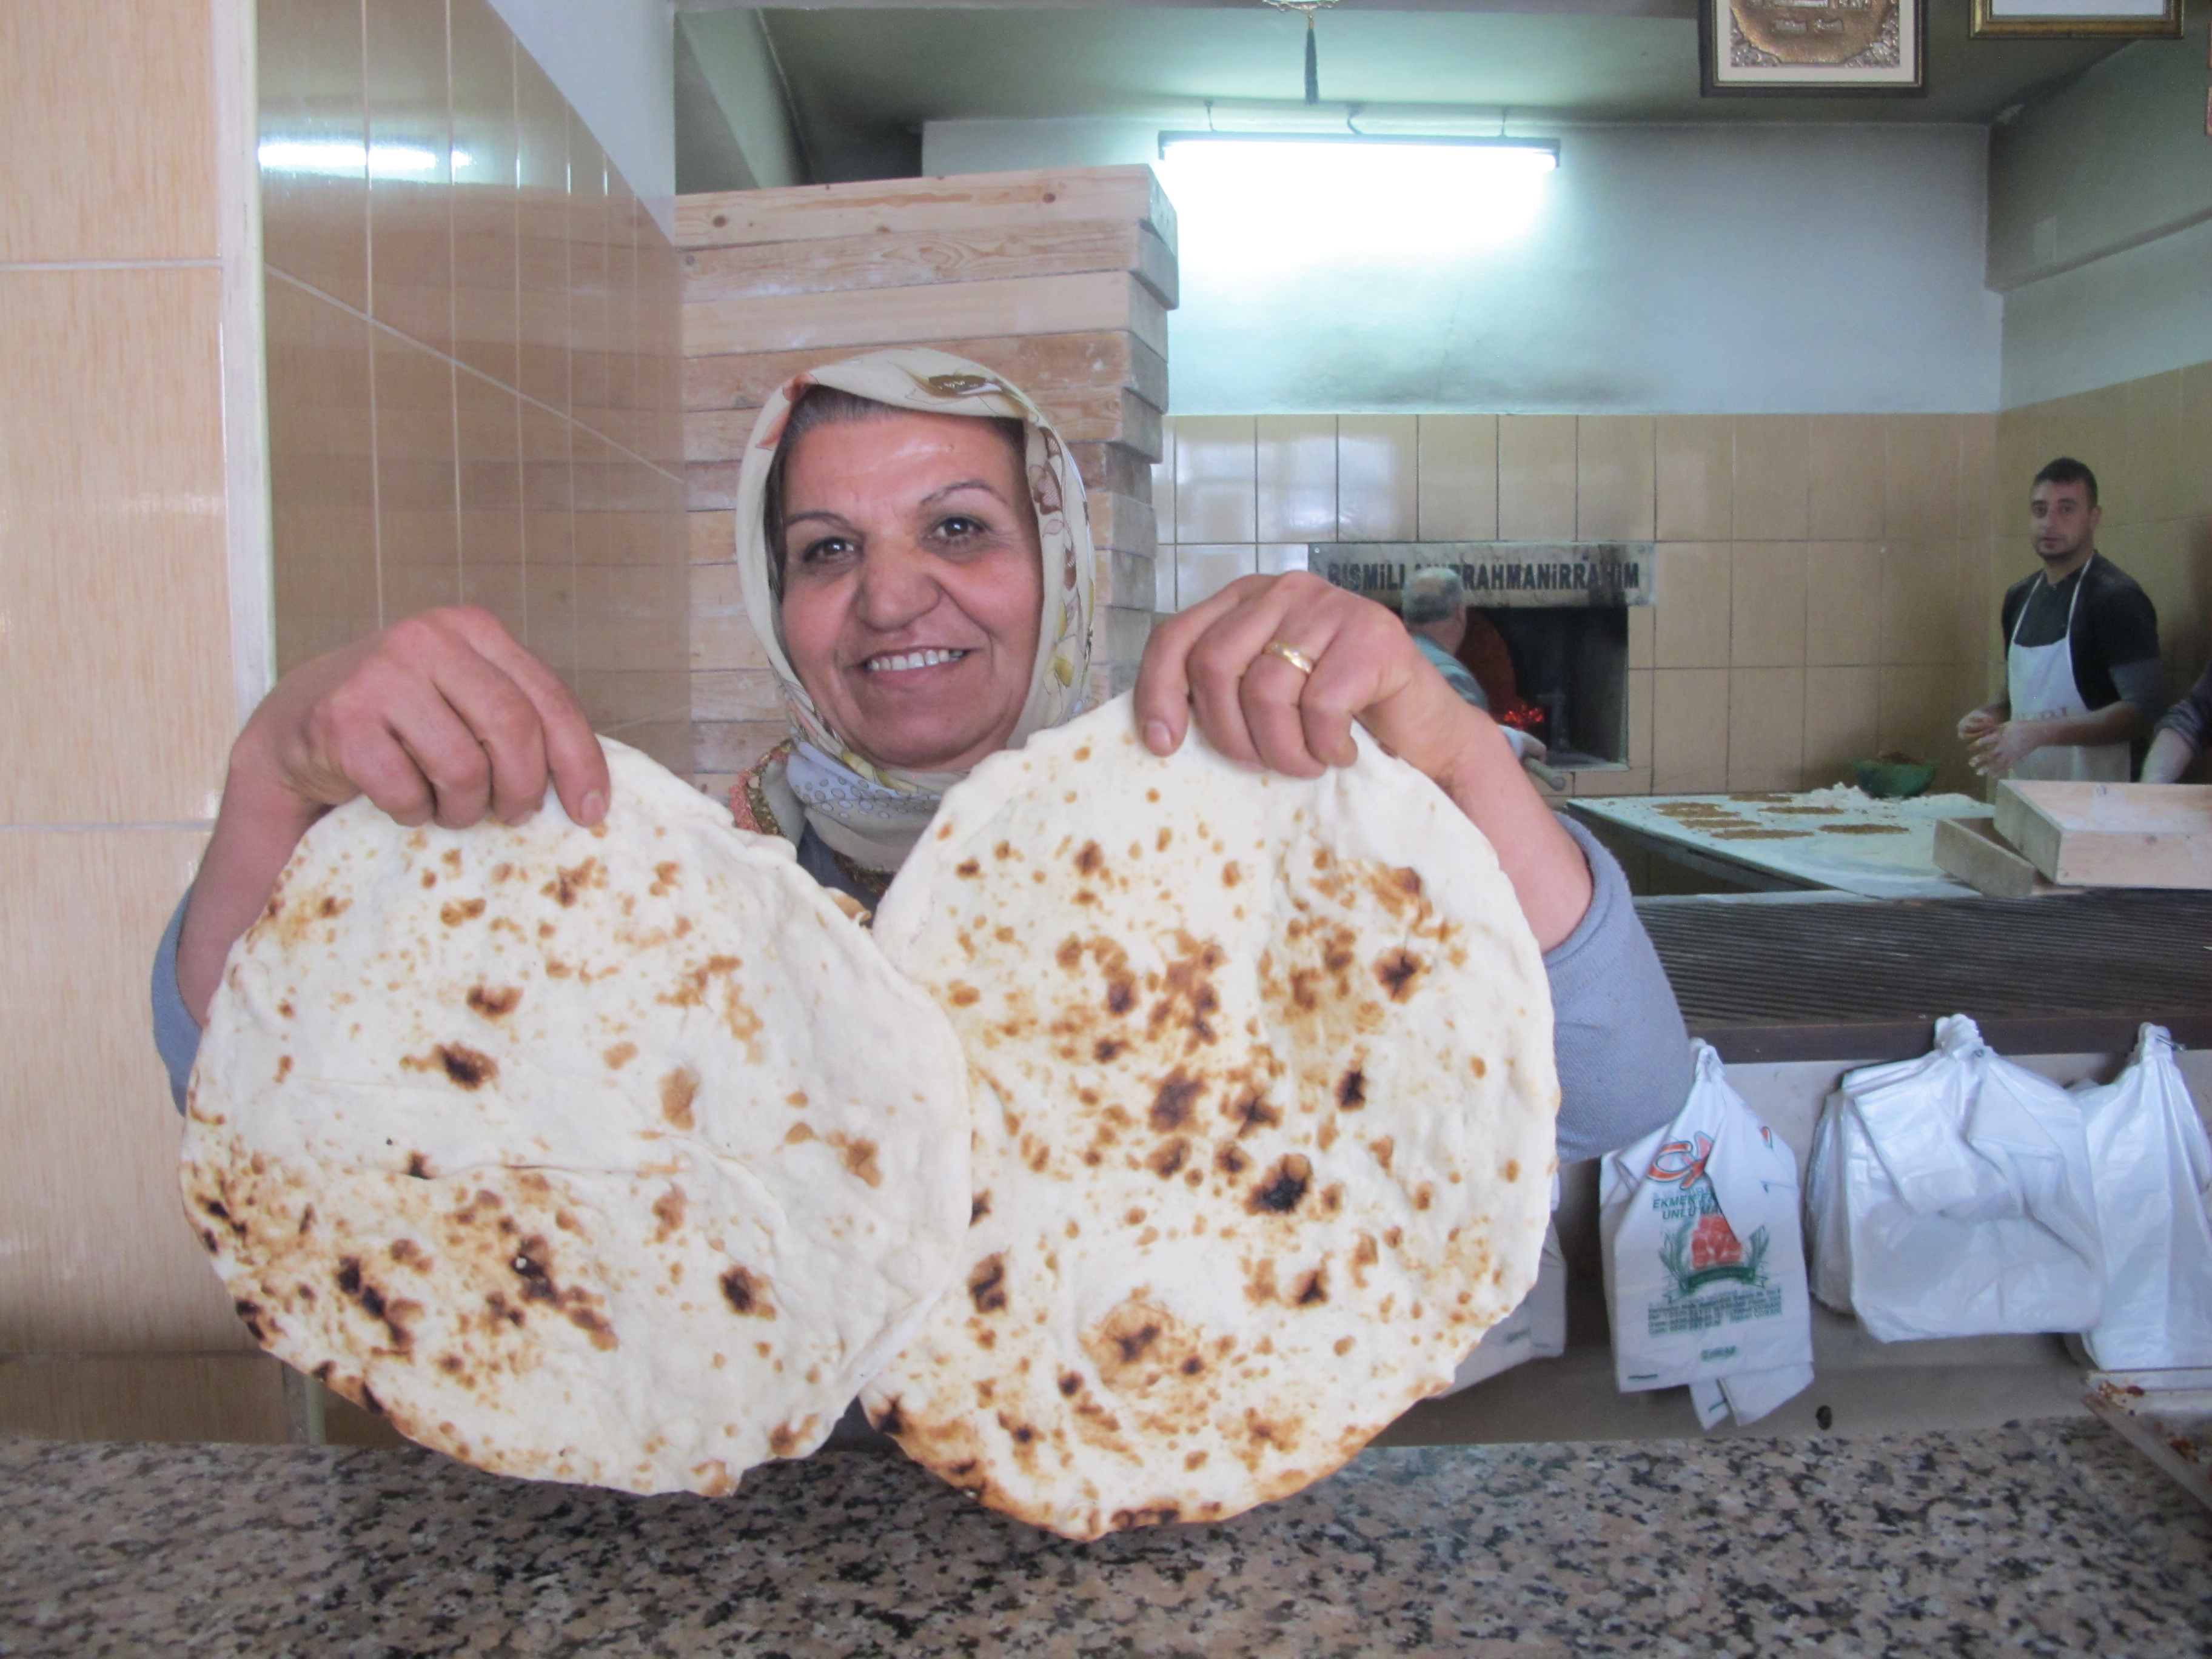 This family bakery began baking Arabic flat bread to cater to the taste of the Syrian refugees, and they now also deliver to the camps.